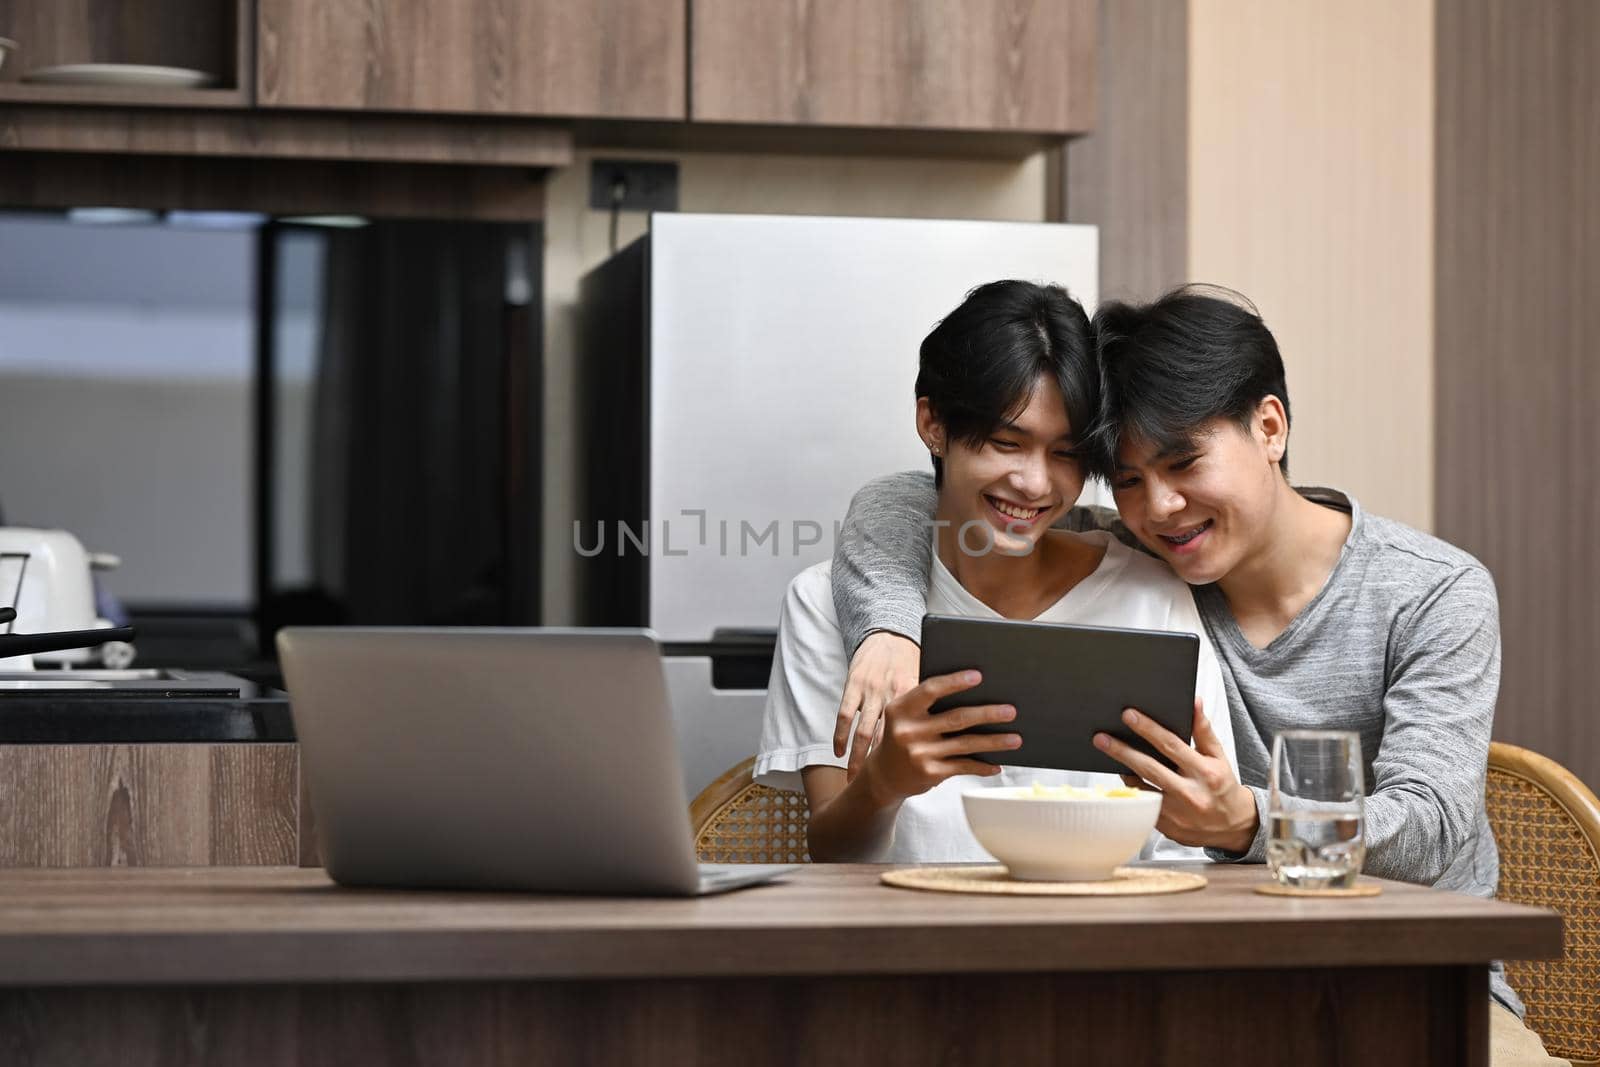 Happy gay couple embracing and surfing internet with digital tablet together at kitchen table. LGBT, pride, relationships and equality concept.